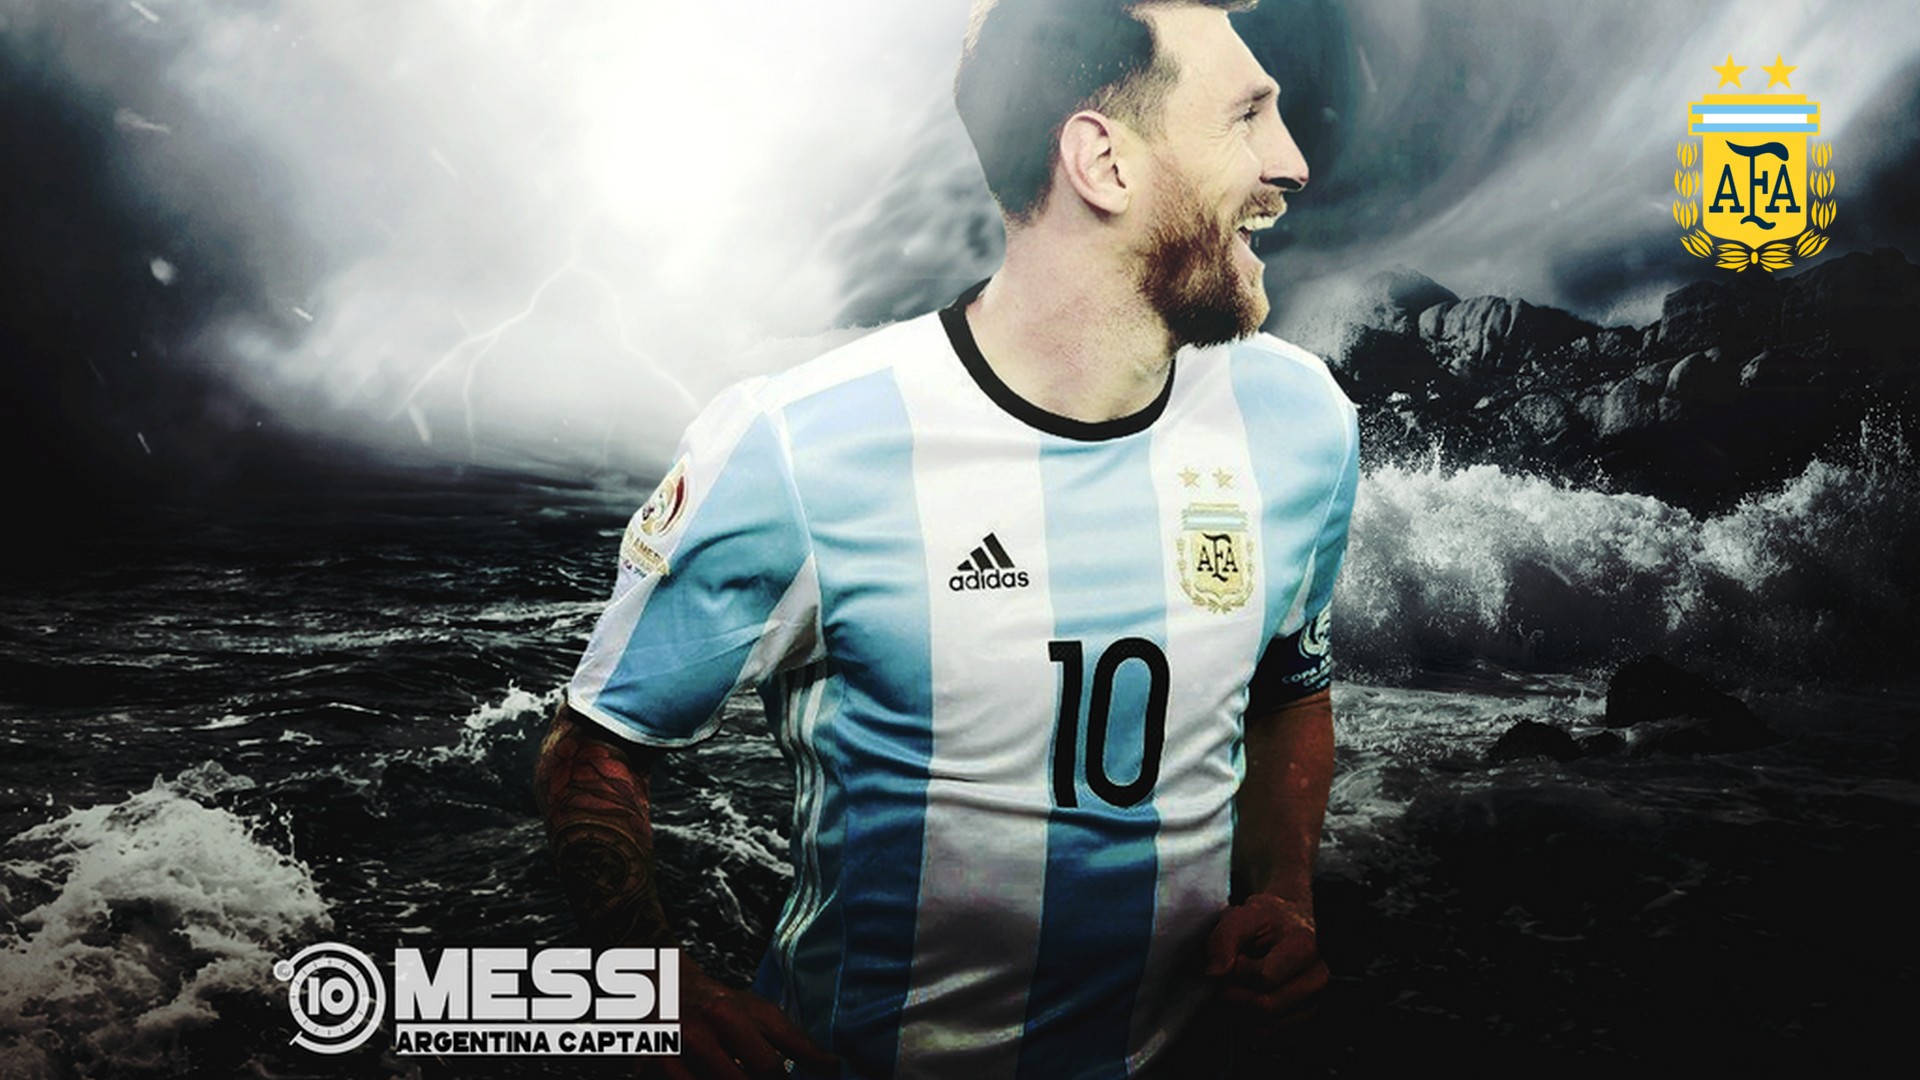 Messi Argentina Wallpaper For Mac Backgrounds With Resolution 1920X1080 pixel. You can make this wallpaper for your Mac or Windows Desktop Background, iPhone, Android or Tablet and another Smartphone device for free